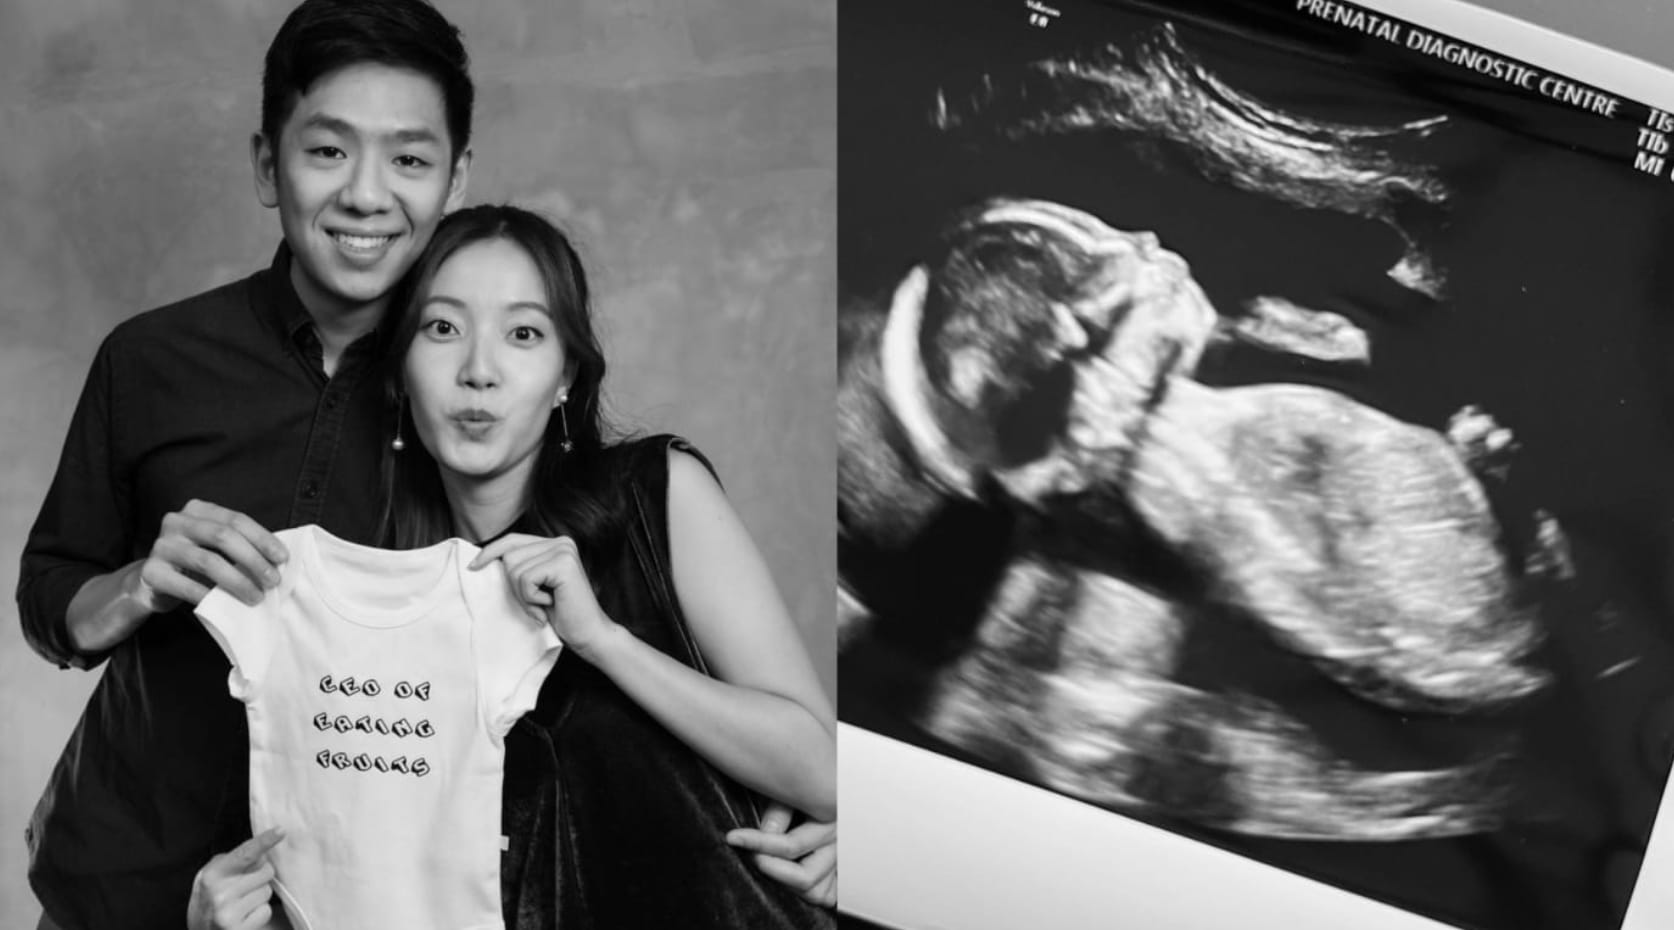 Influencer Annette Lee, 30, Just Announced She's 7 Months Pregnant